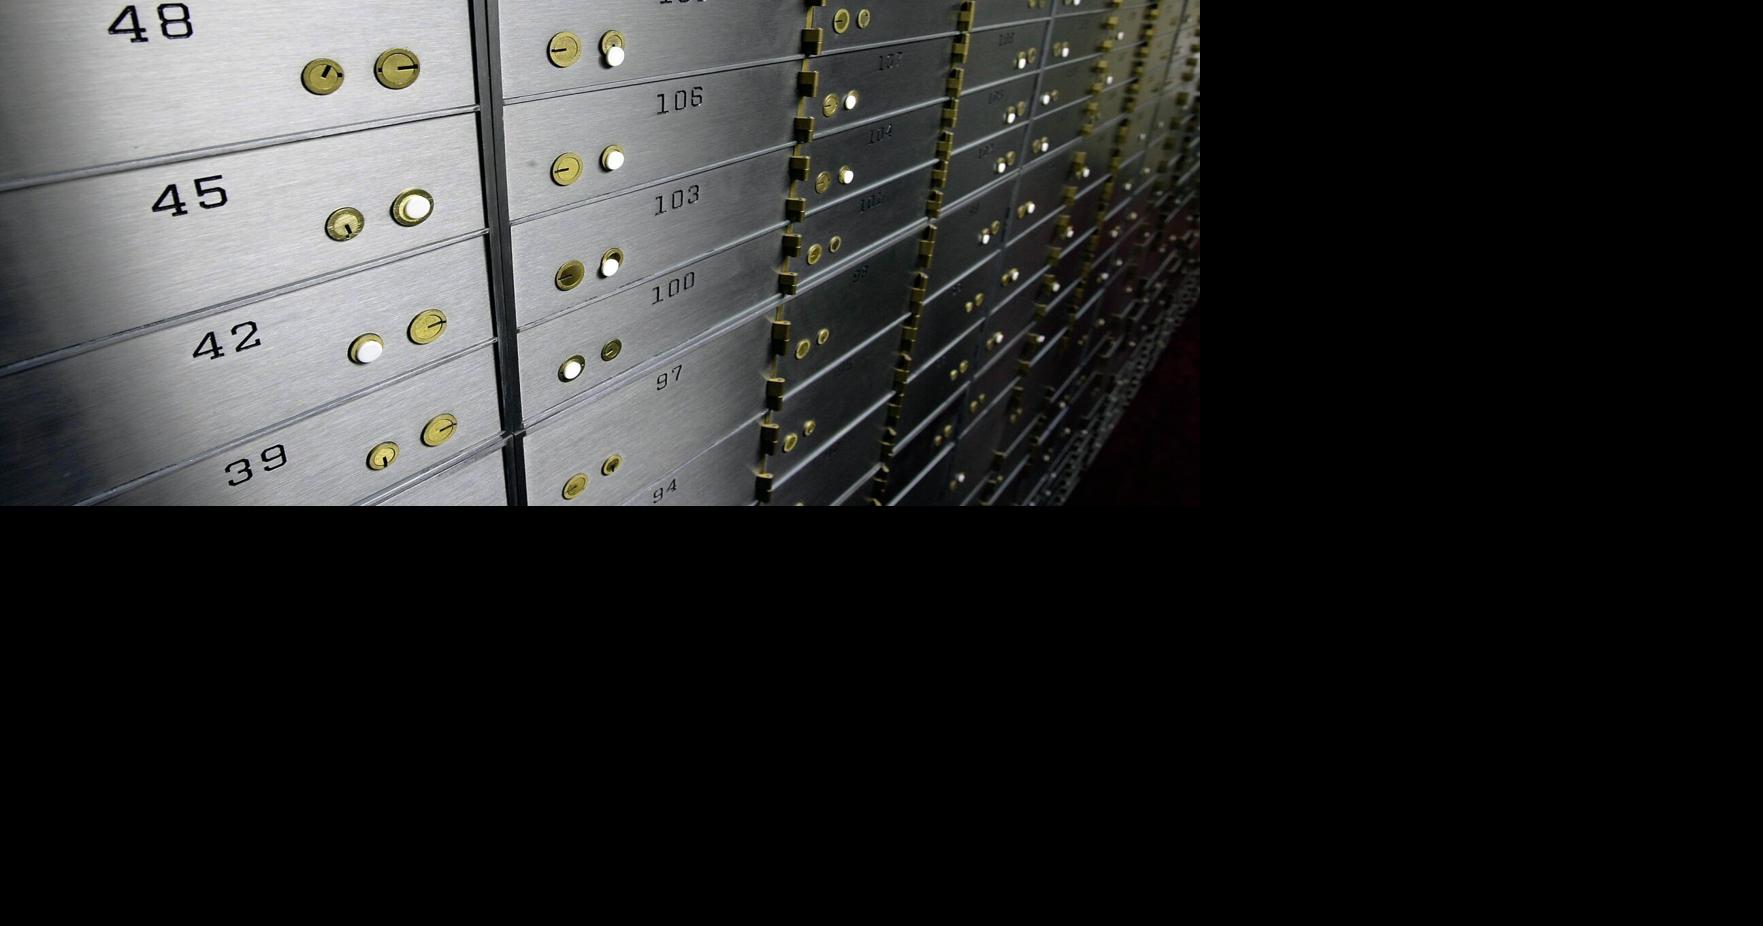 Bank probes missing contents of safety-deposit box